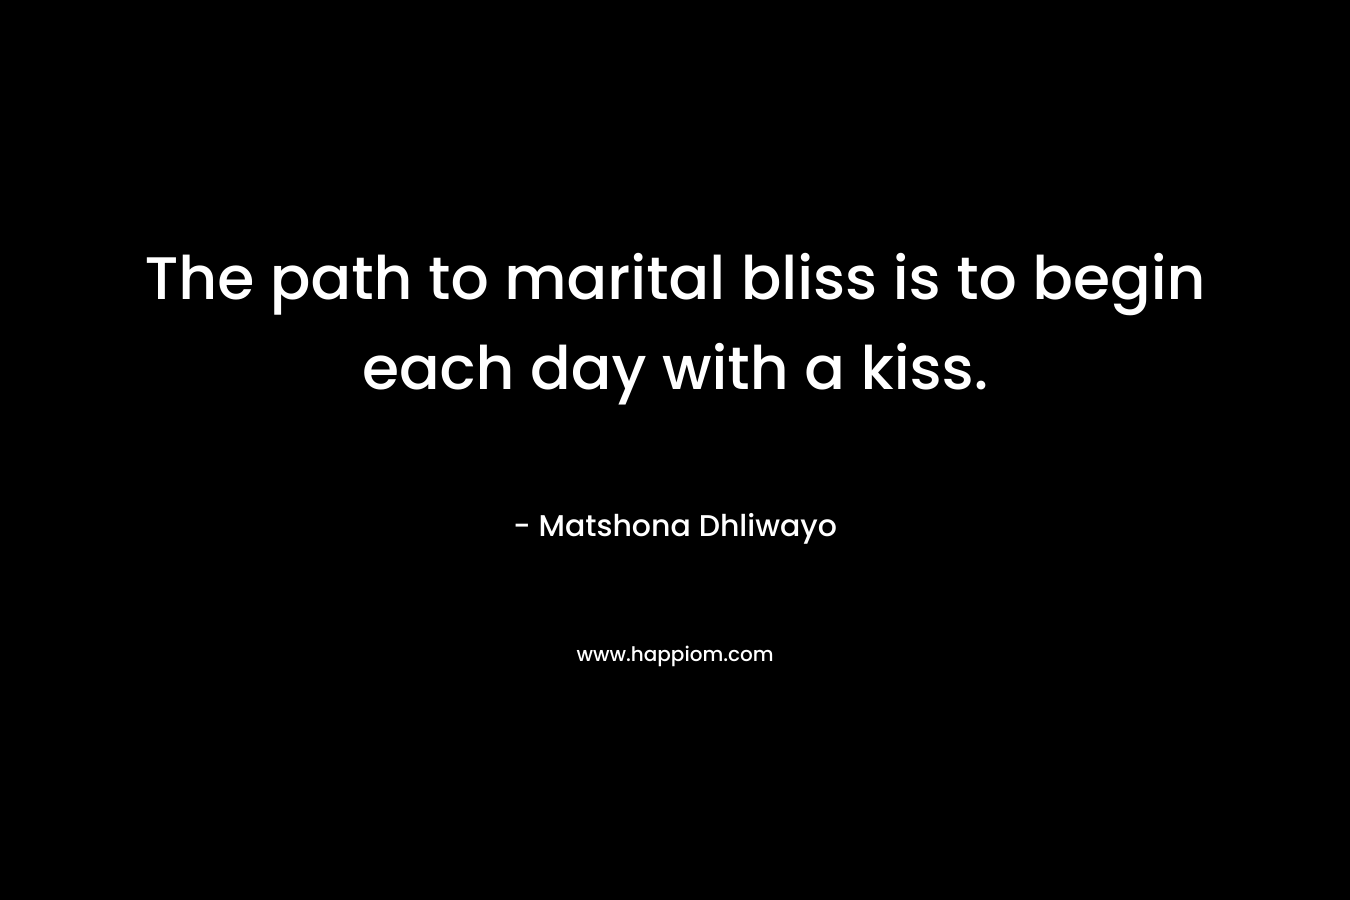 The path to marital bliss is to begin each day with a kiss.